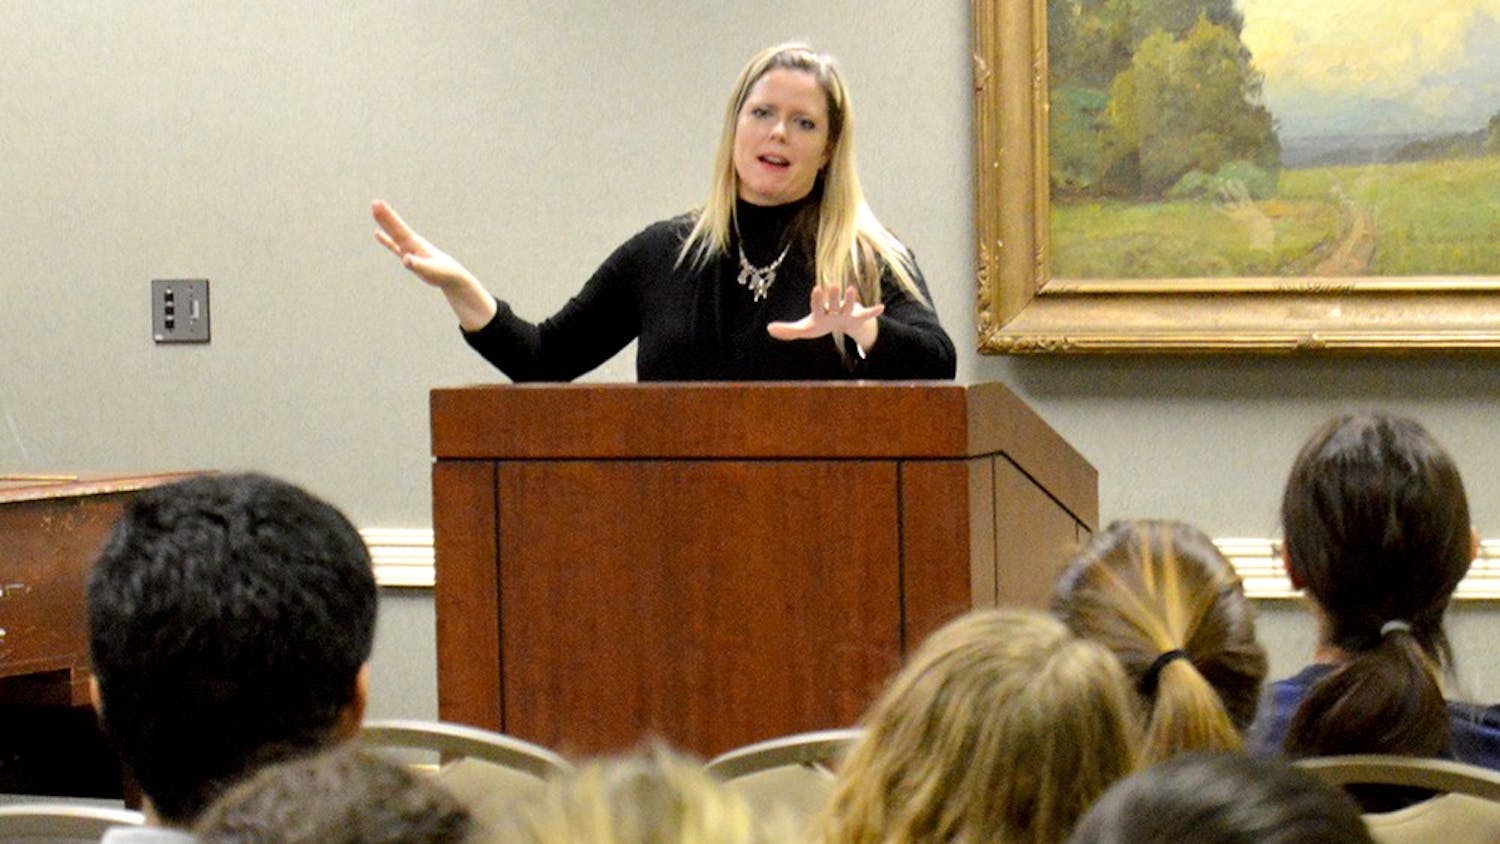 Jennifer Thurma, director of Victim Services for the Indiana Attorney General, speaks about the sources and statistics behind human trafficking Tuesday at State Room East in the Indiana Memorial Union. "The Hidden Reality: An Interactive Program on Human Trafficking" included an interactive process that led participants through various countries where human trafficking occurs. 